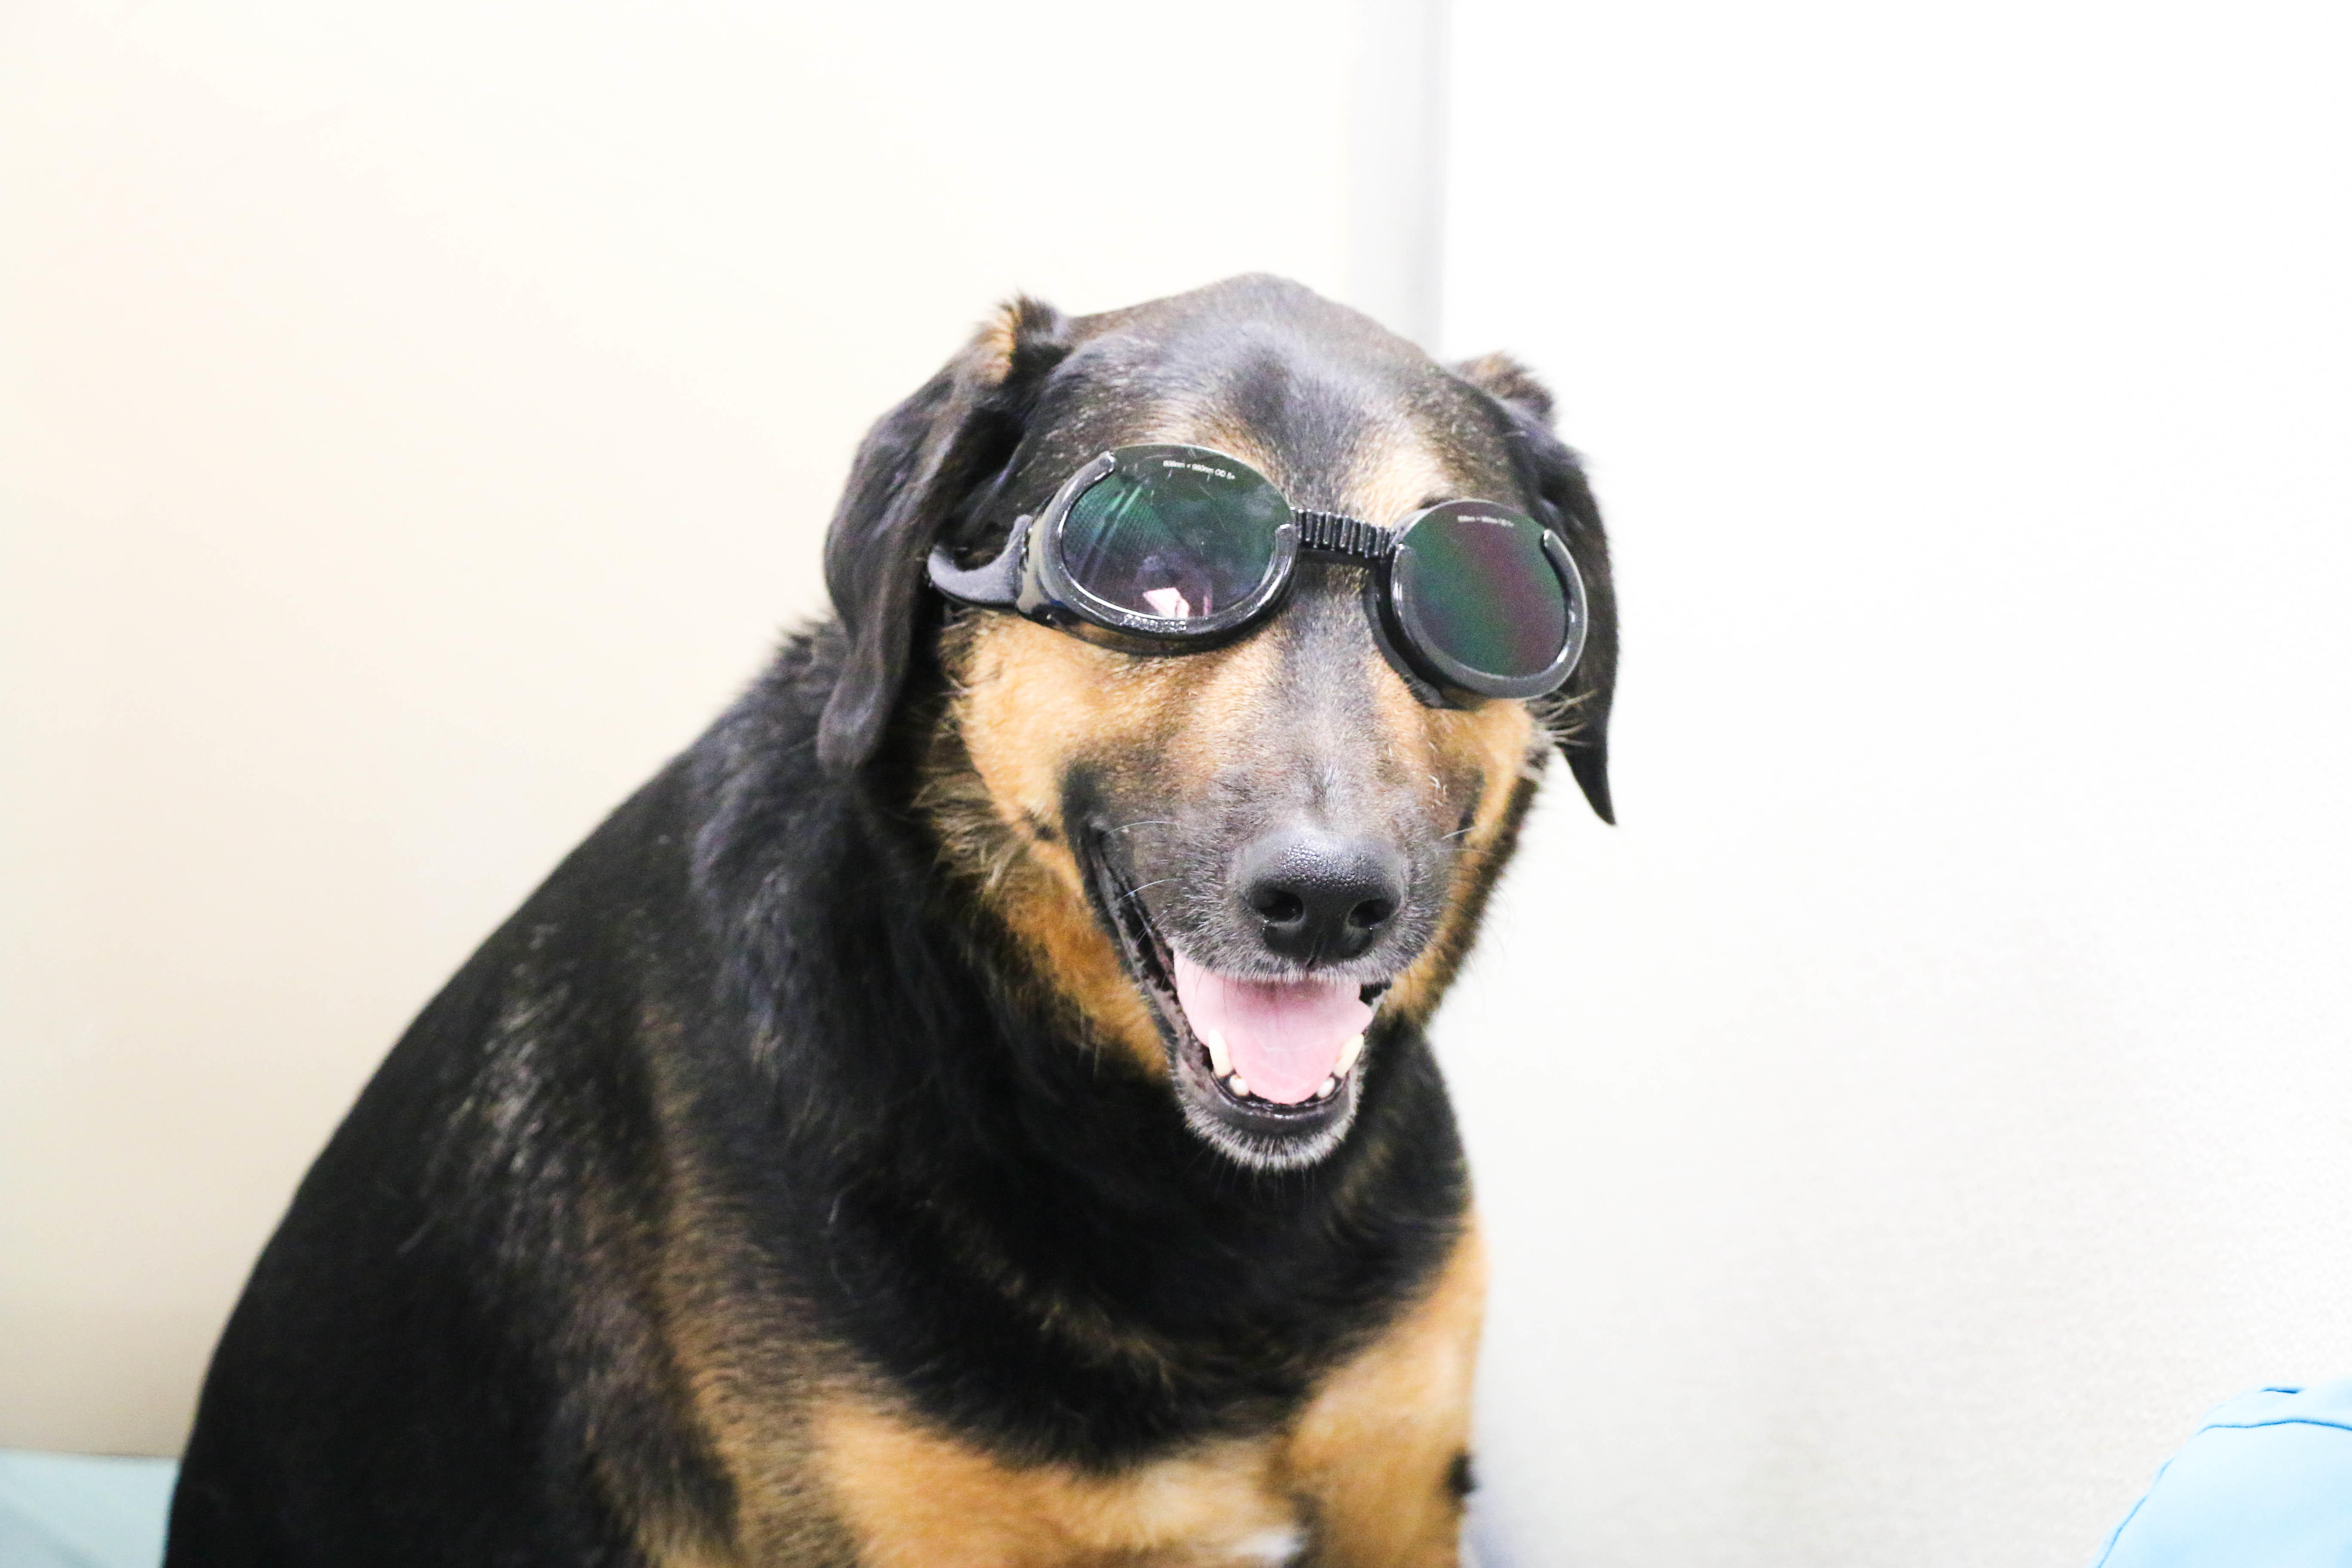 This pooch is rocking our Laser Therapy "doggles"!